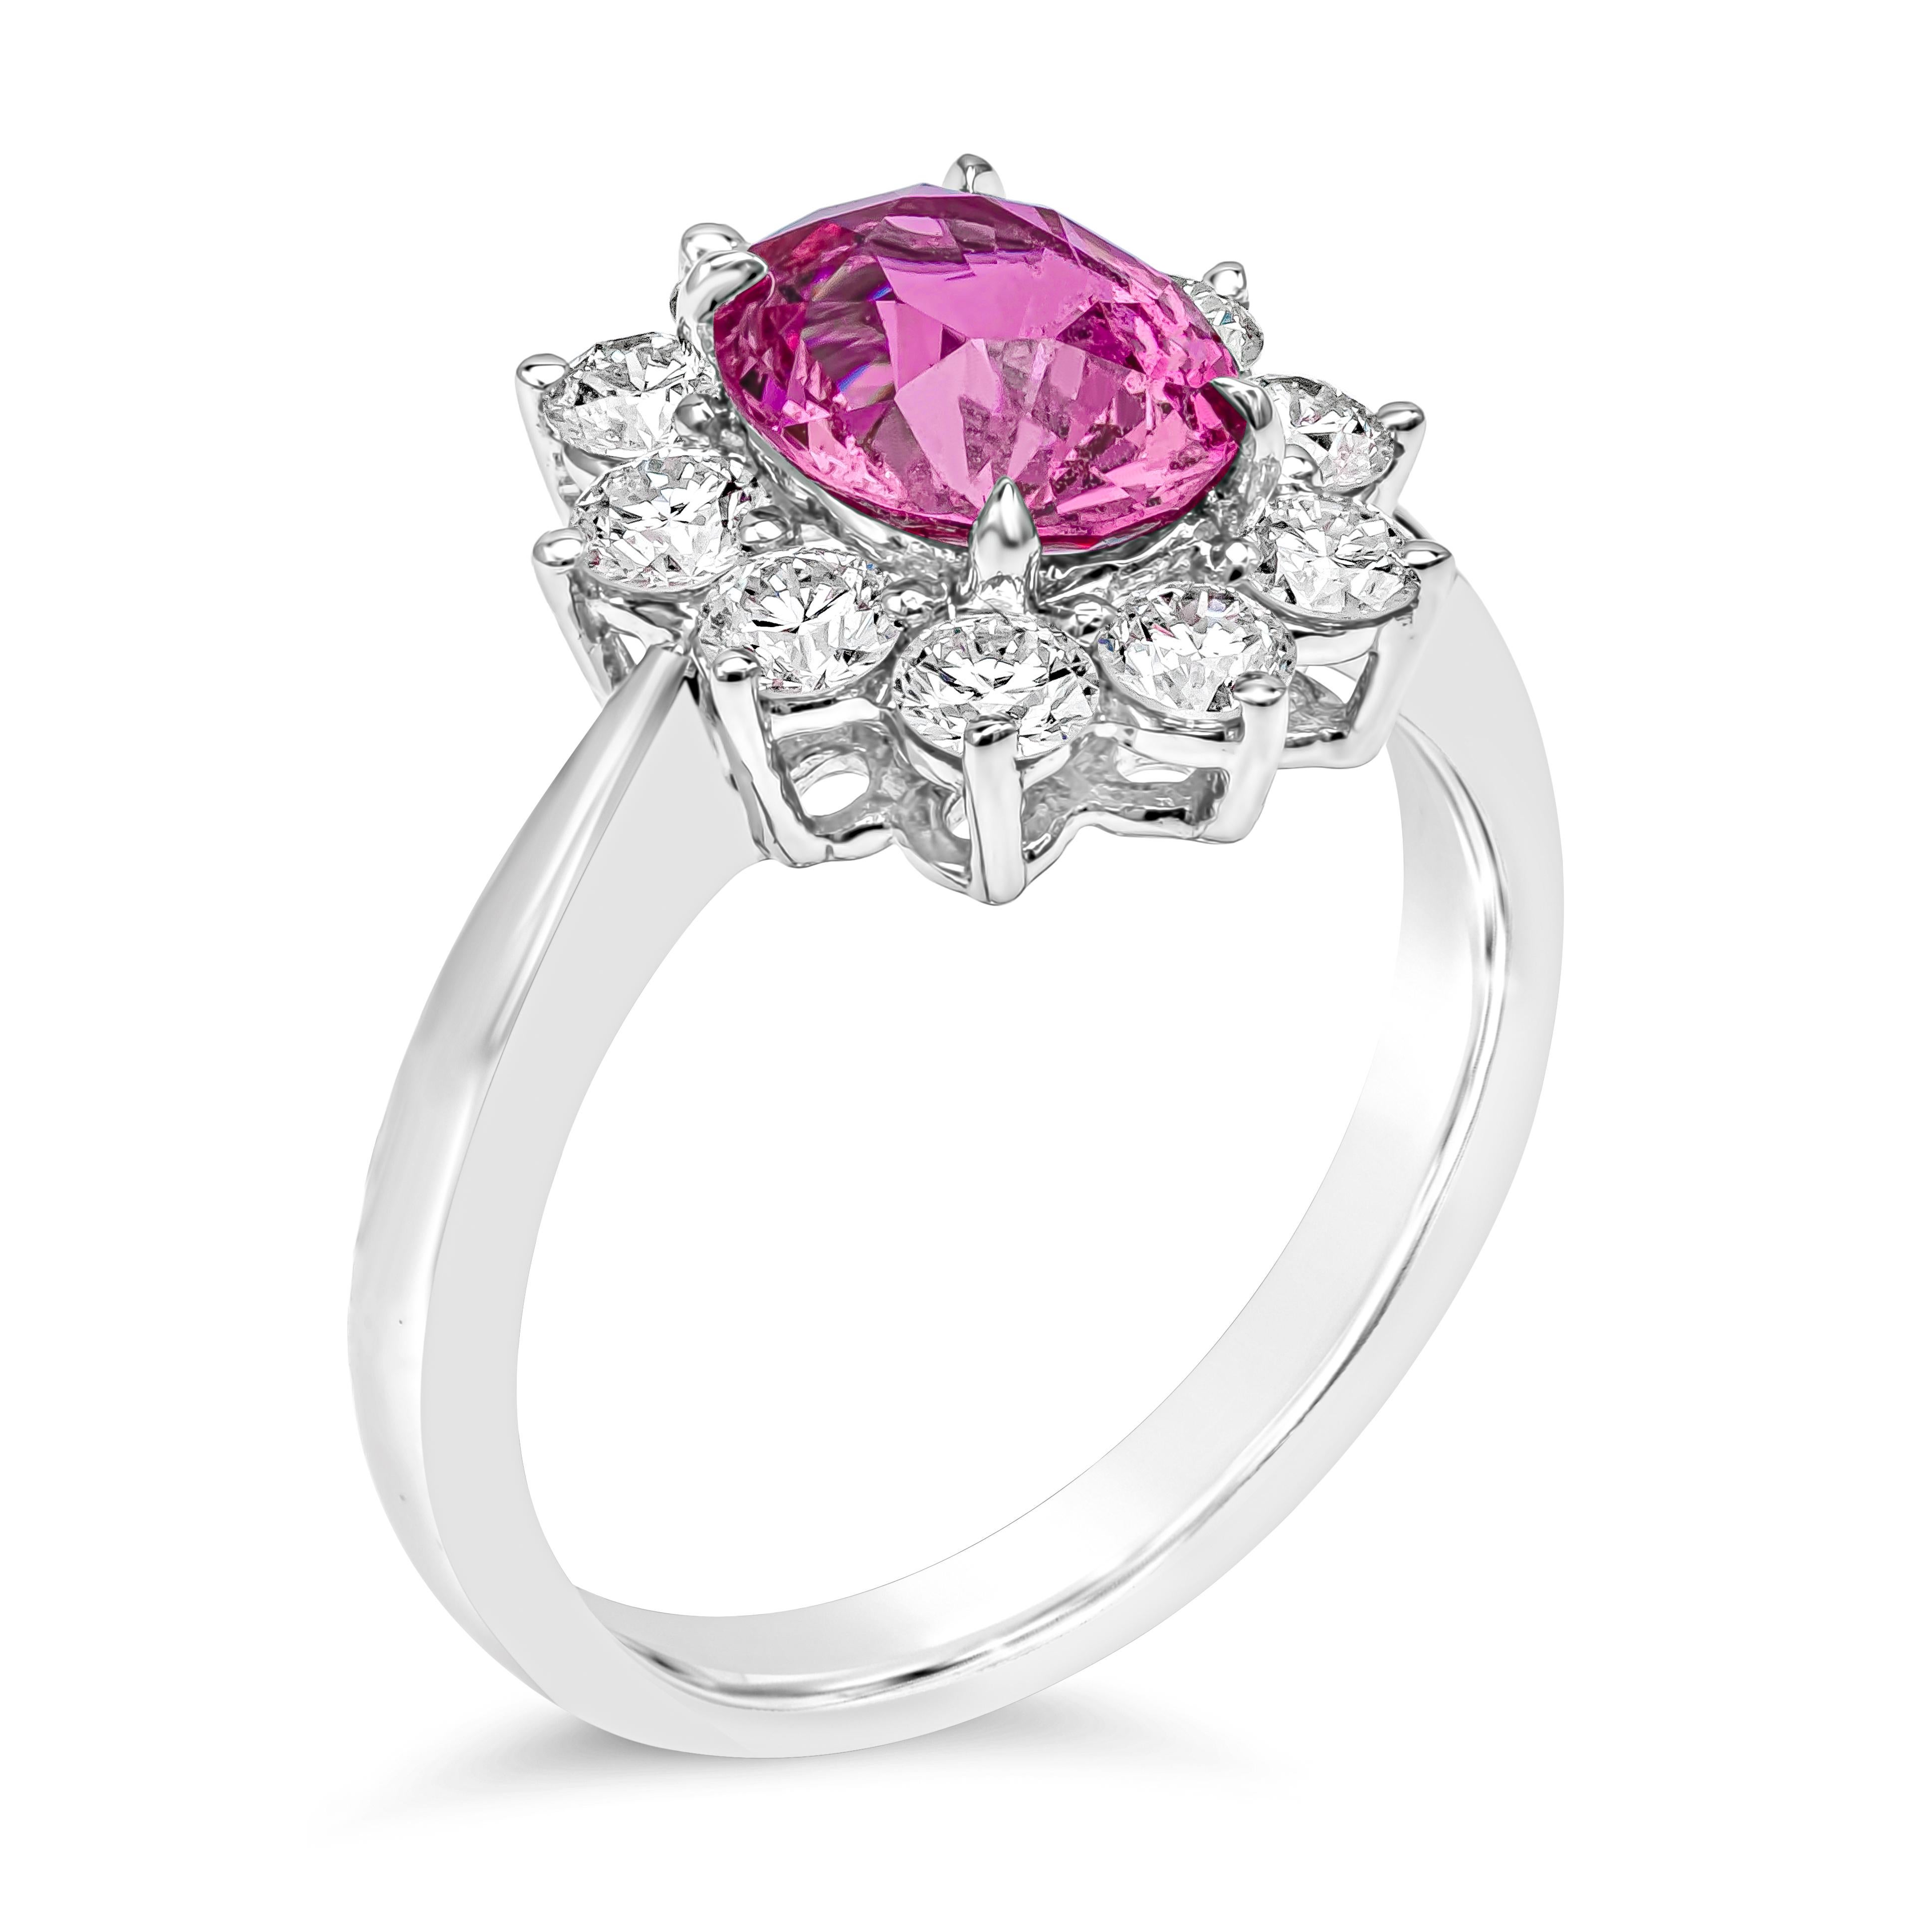 Contemporary Roman Malakov 1.89 Carat Oval Pink Sapphire with Diamonds Halo Engagement Ring For Sale